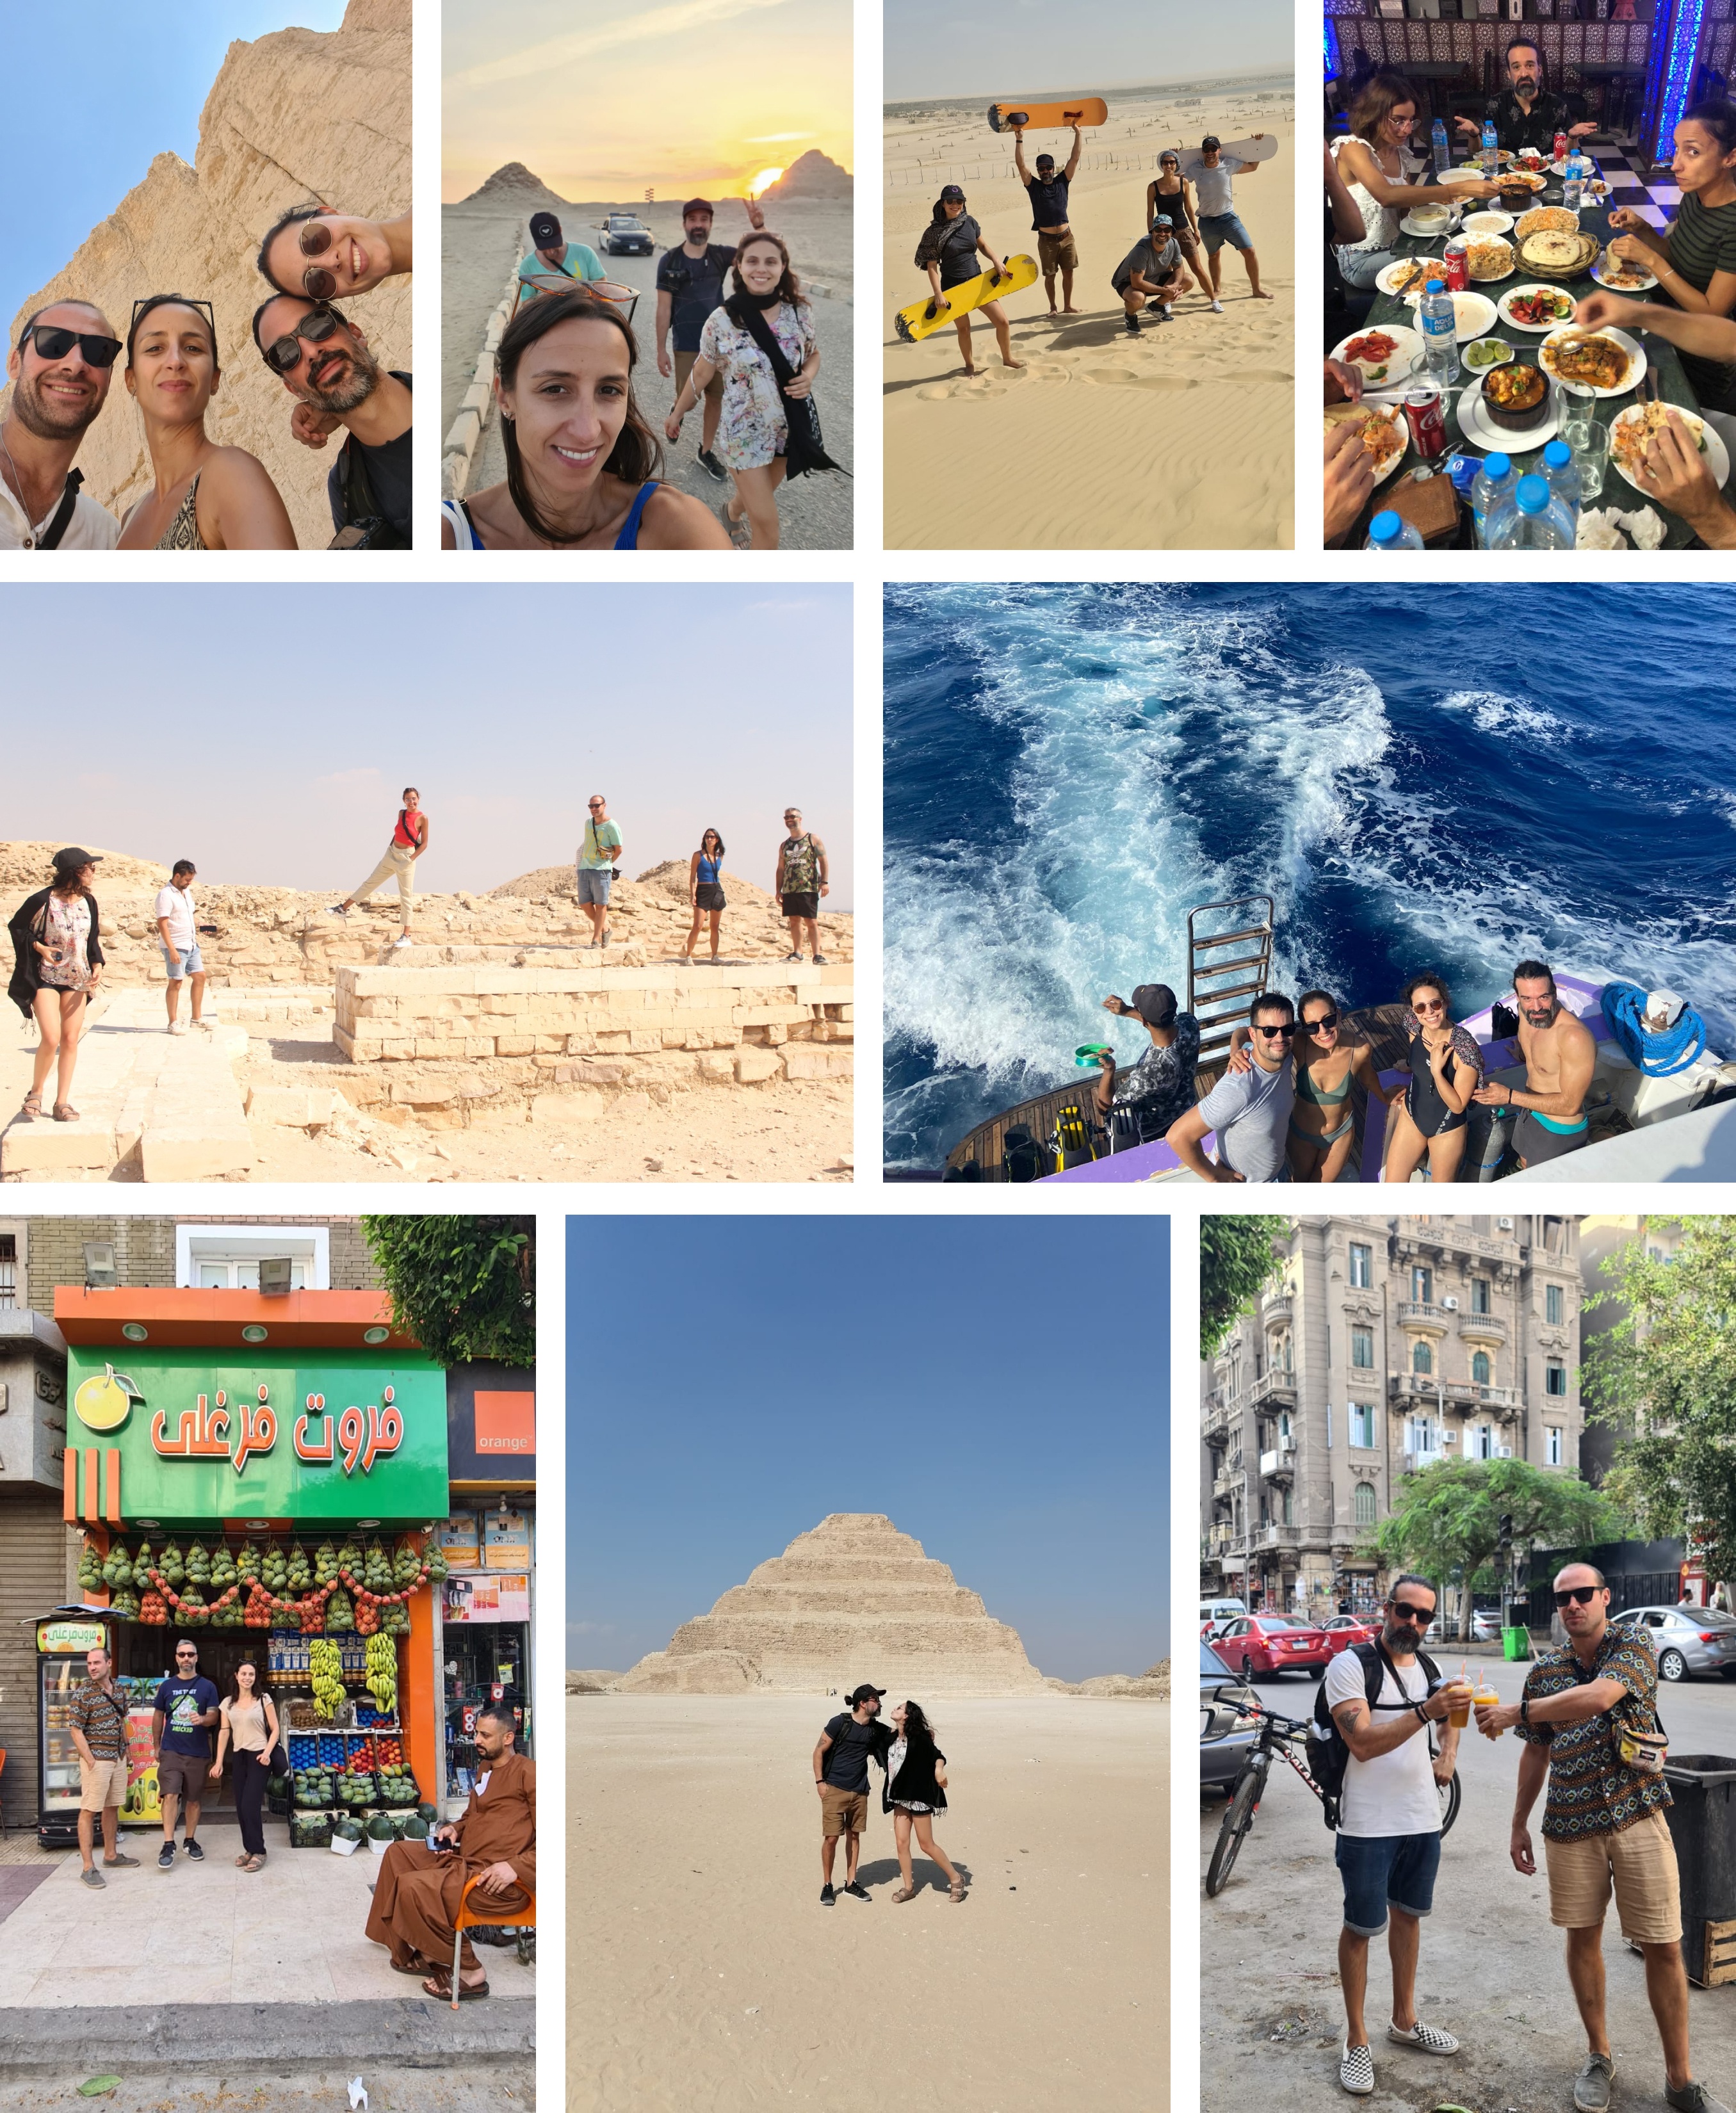 Egypt with friends: exploring the pyramids and temples, diving, and visiting local restaurants